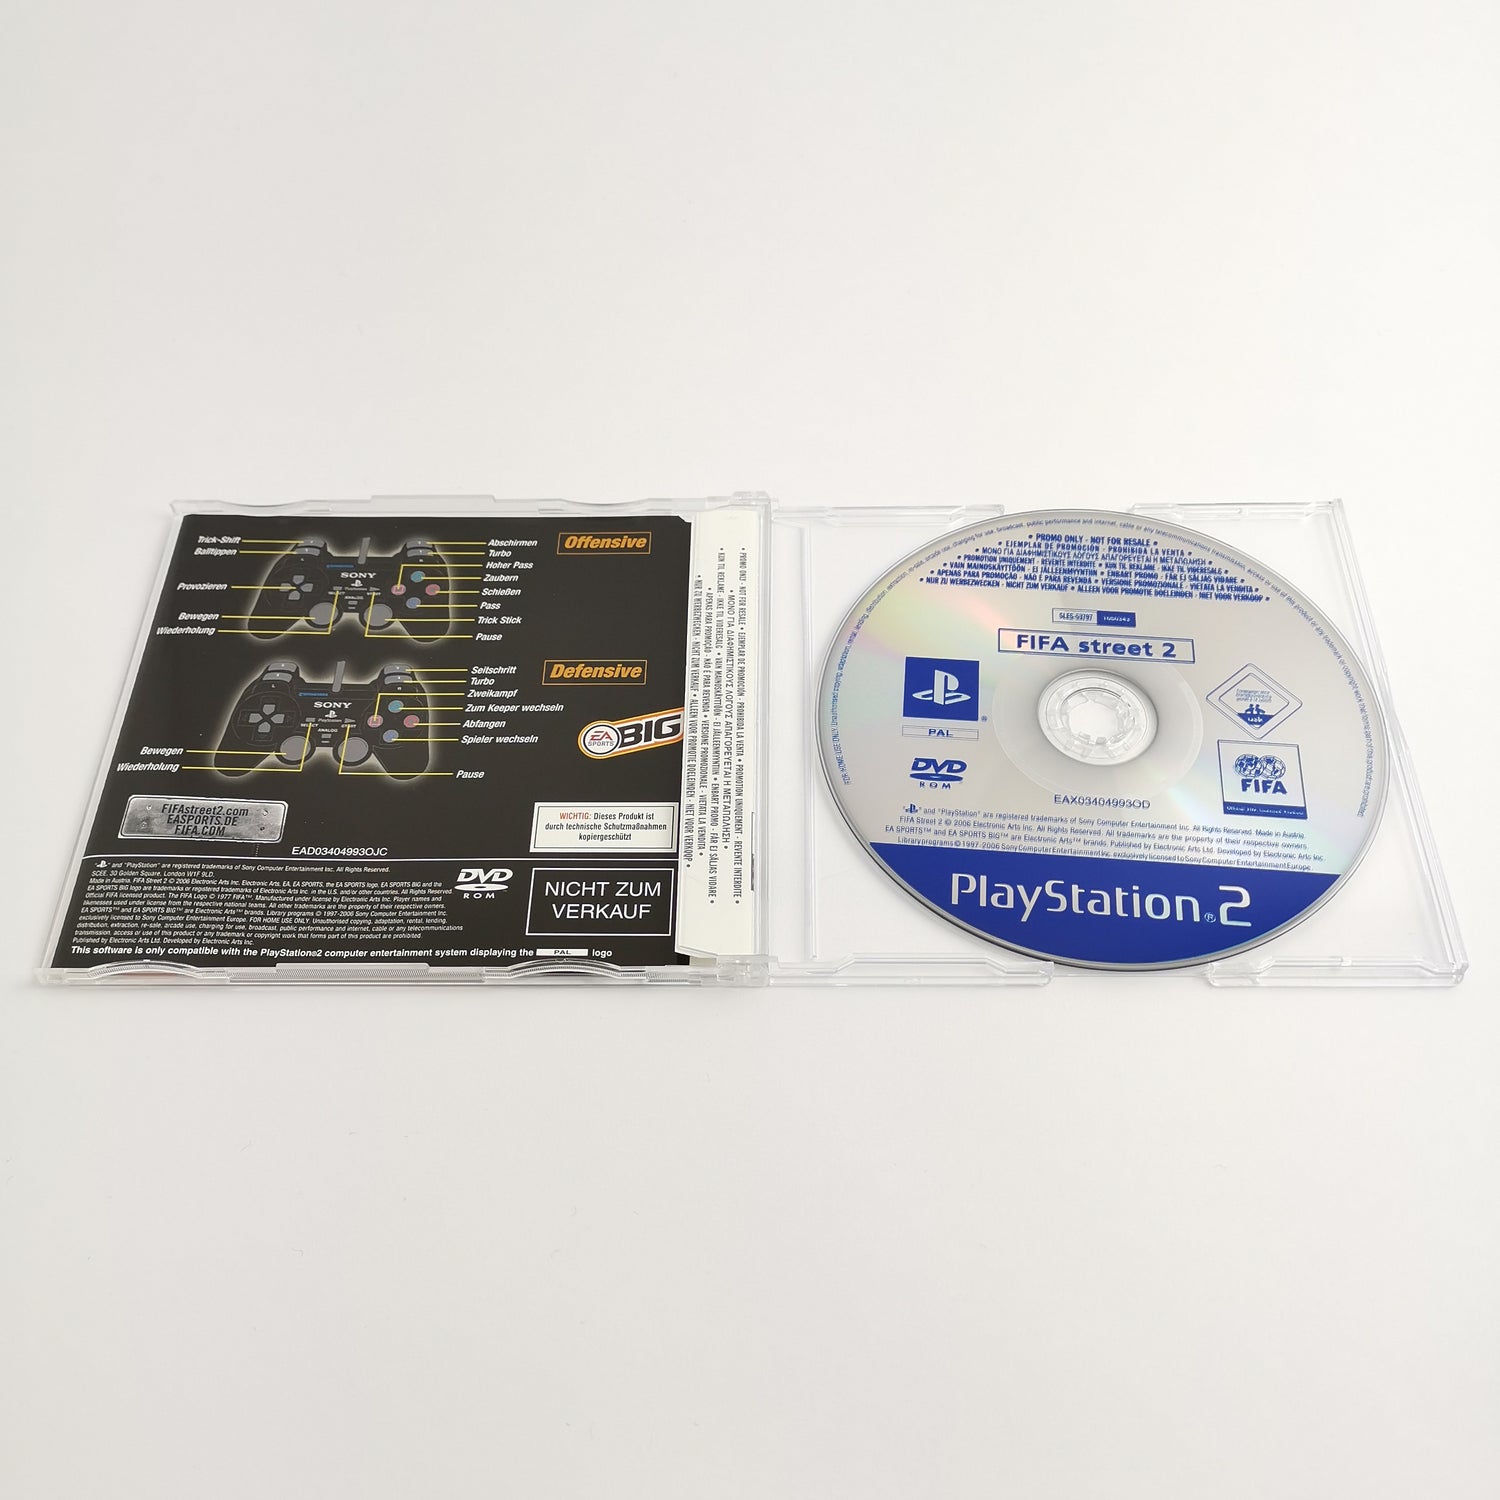 Sony Playstation 2 Promo Game: Fifa Street 2 - Full Version | PS2 OVP PAL